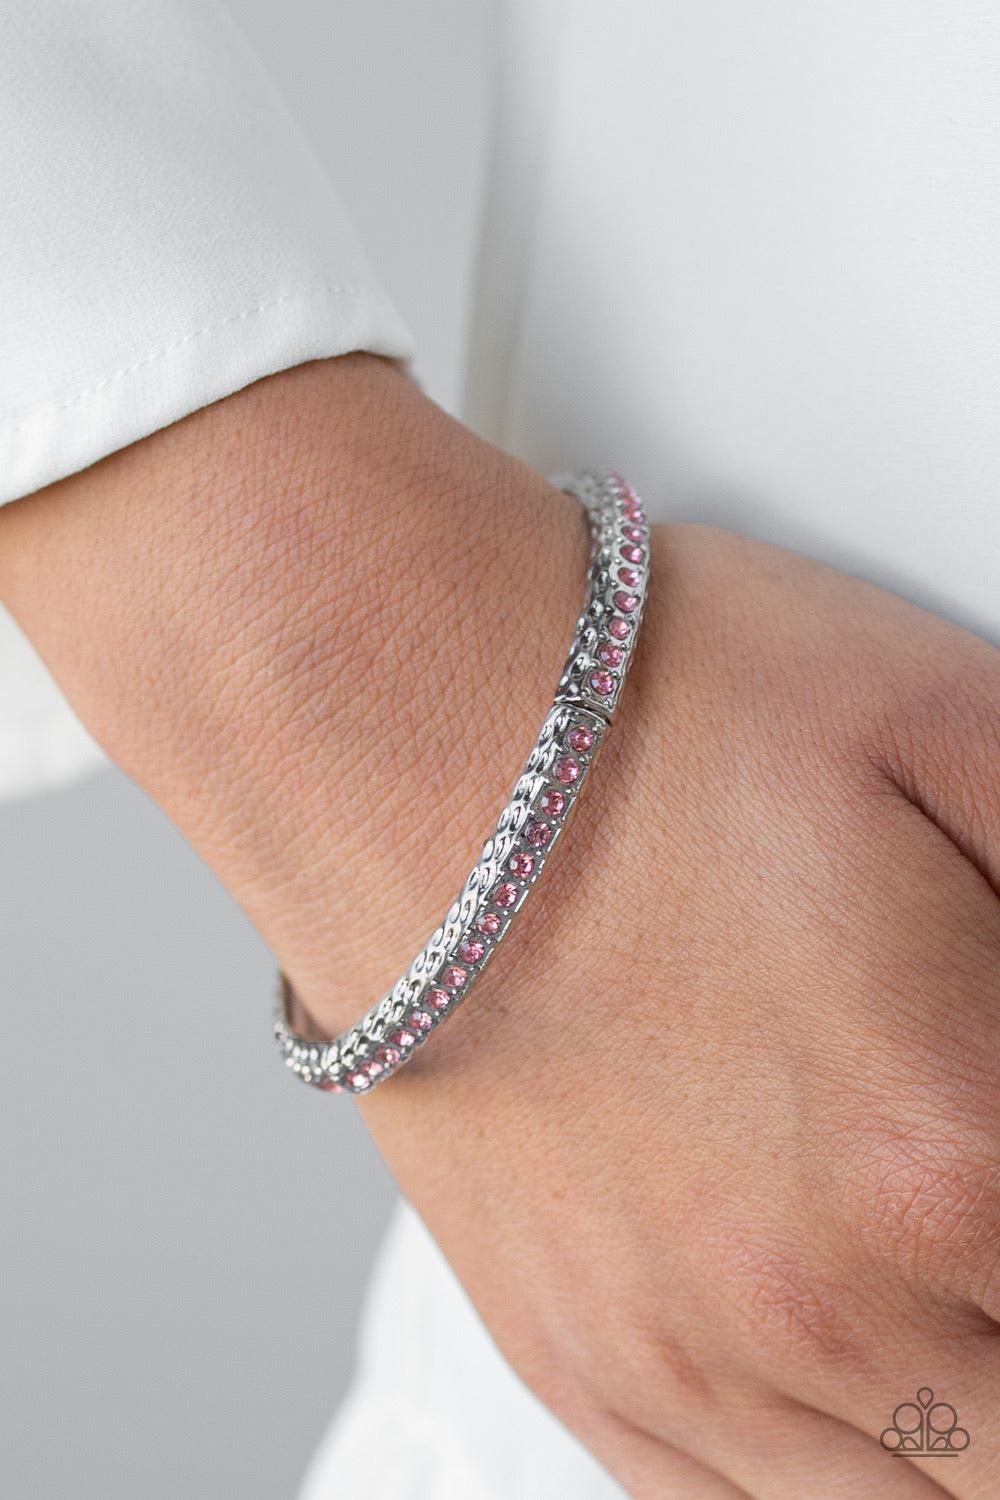 Paparazzi Accessories Cha Cha Ching! - Purple Encrusted in a row of glittery pink rhinestones, hammered silver frames are threaded along a stretchy band around the wrist for a glamorous bangle-like look. Jewelry